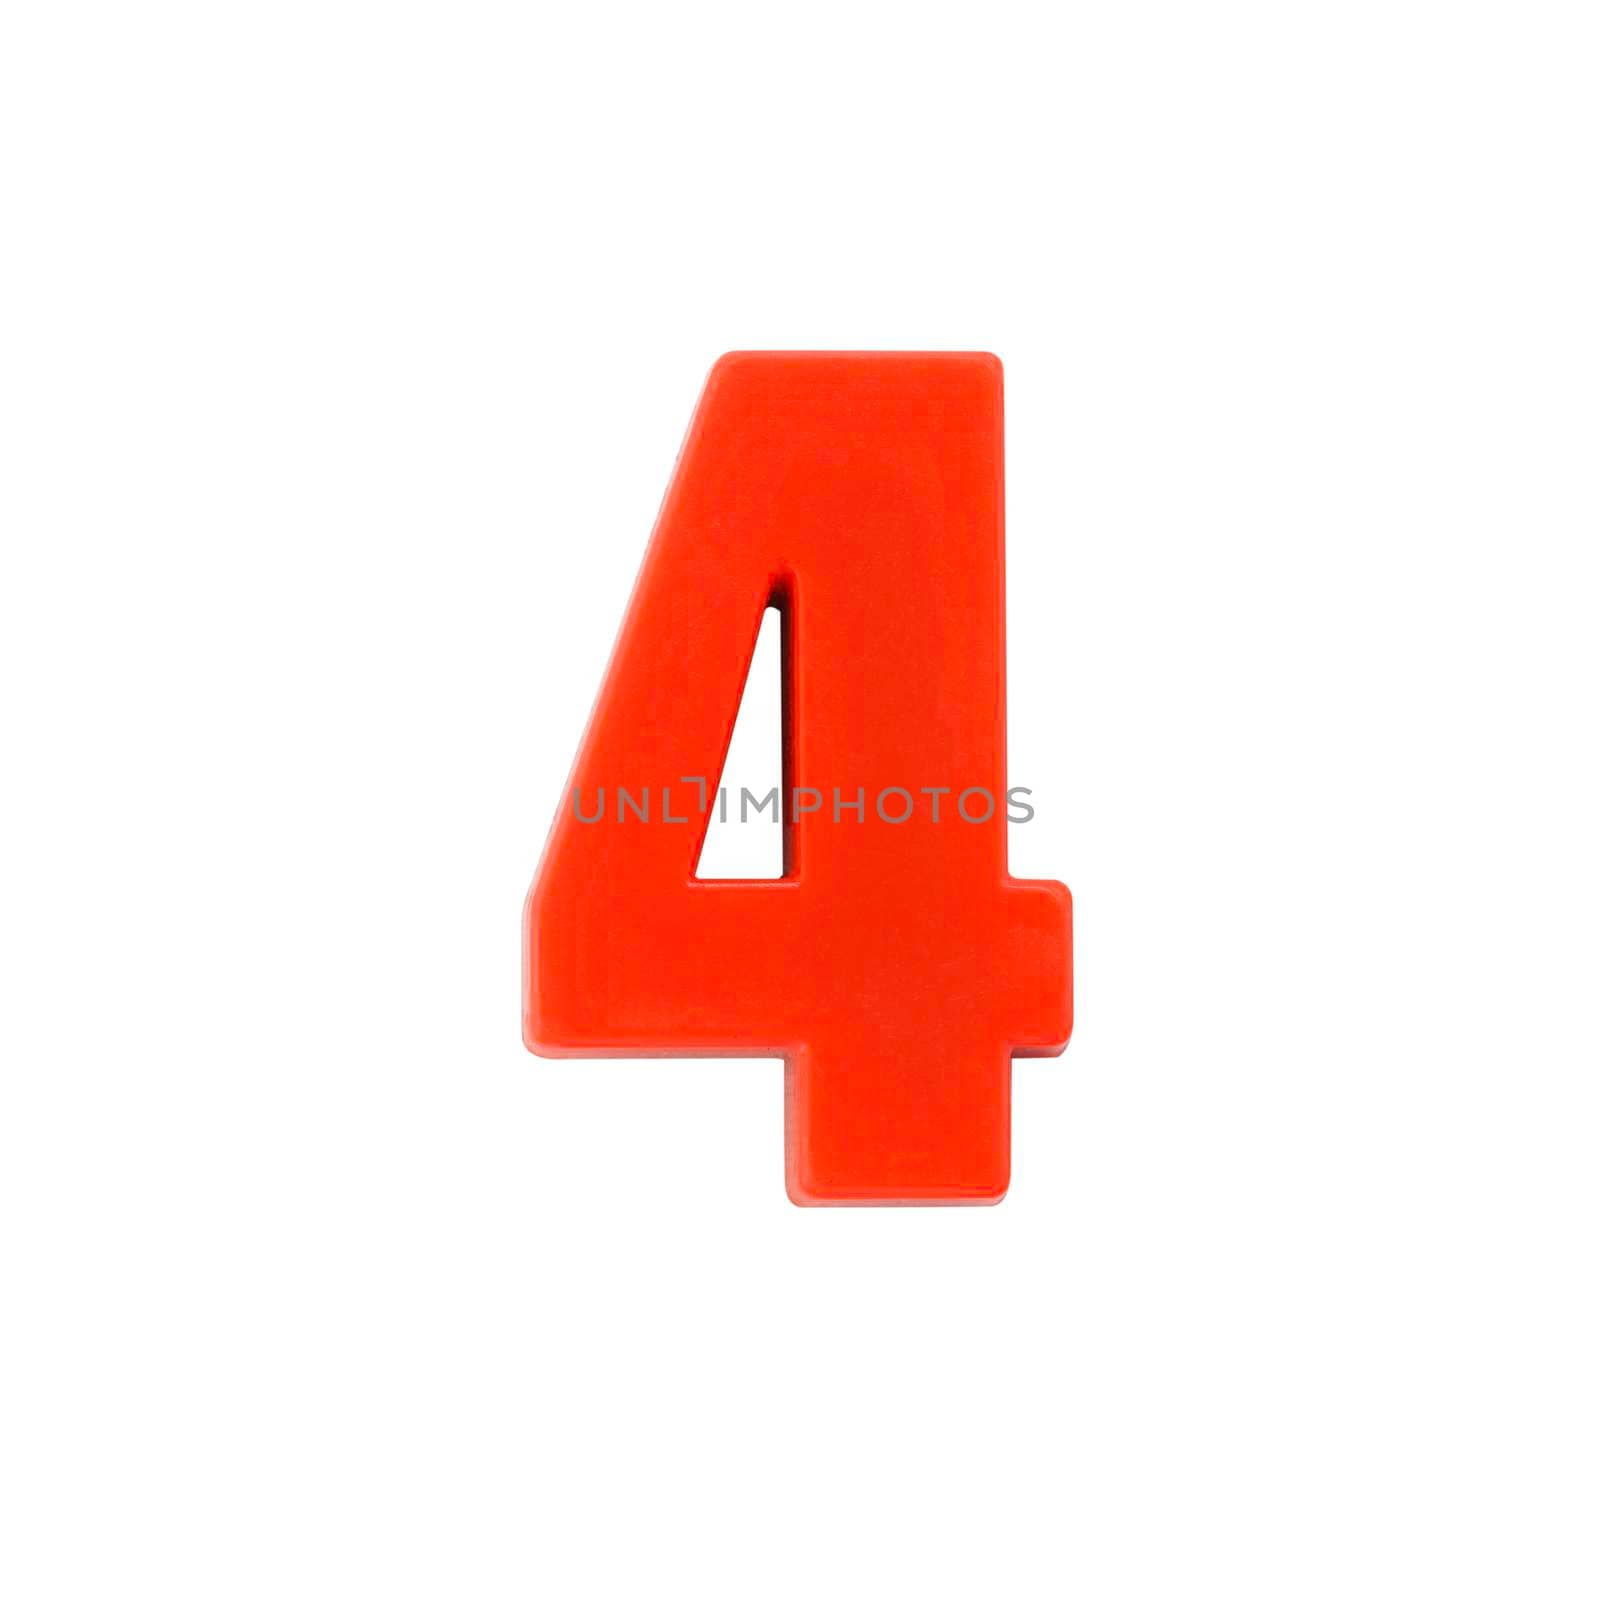 Shot of a number four made of red plastic with clipping path by stoonn